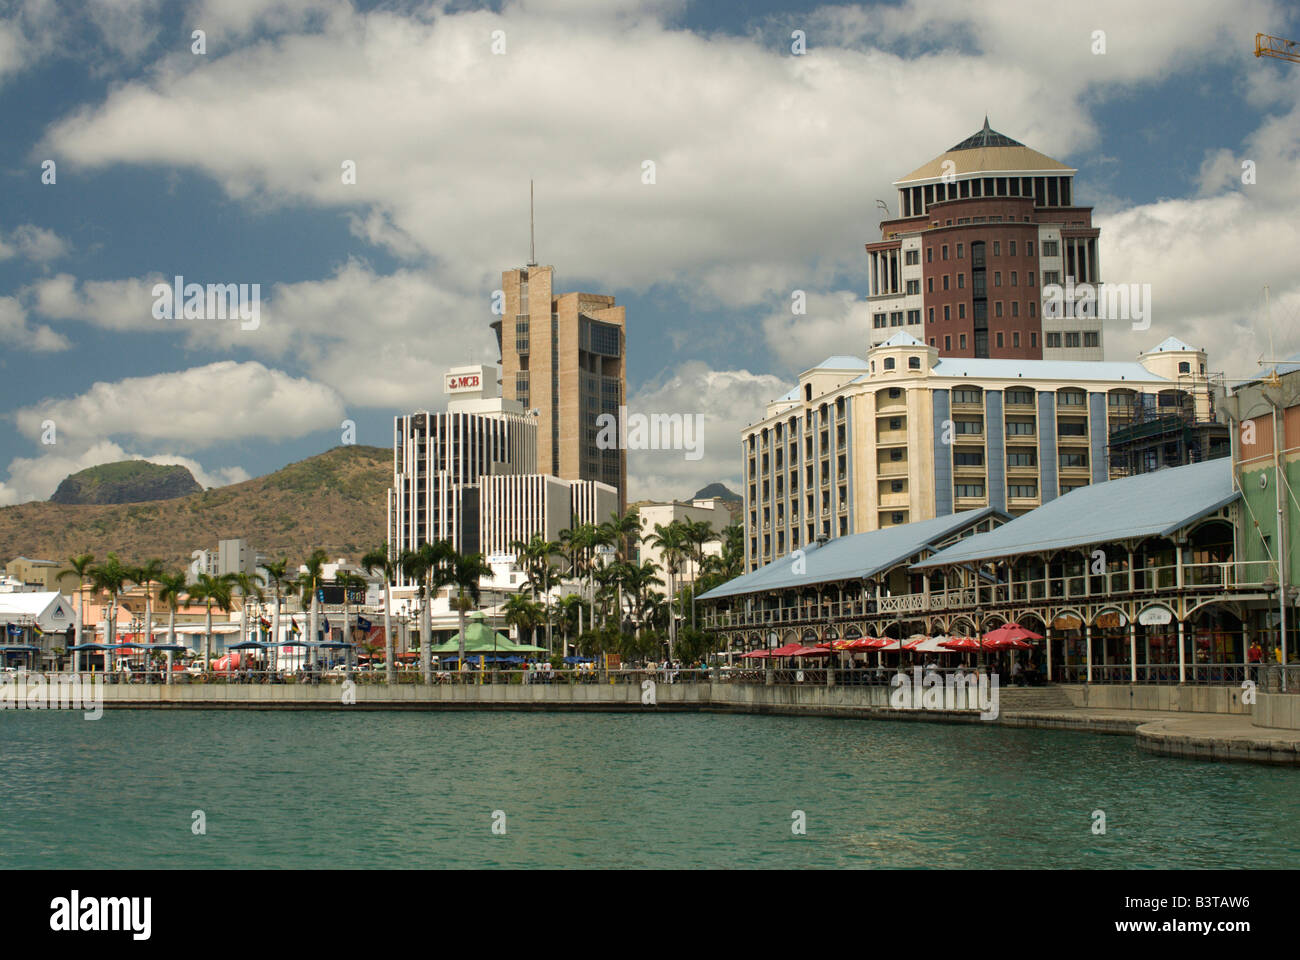 Mauritius, Port Louis. A view of the waterfront with the main buildings of Port Louis in the background. Stock Photo